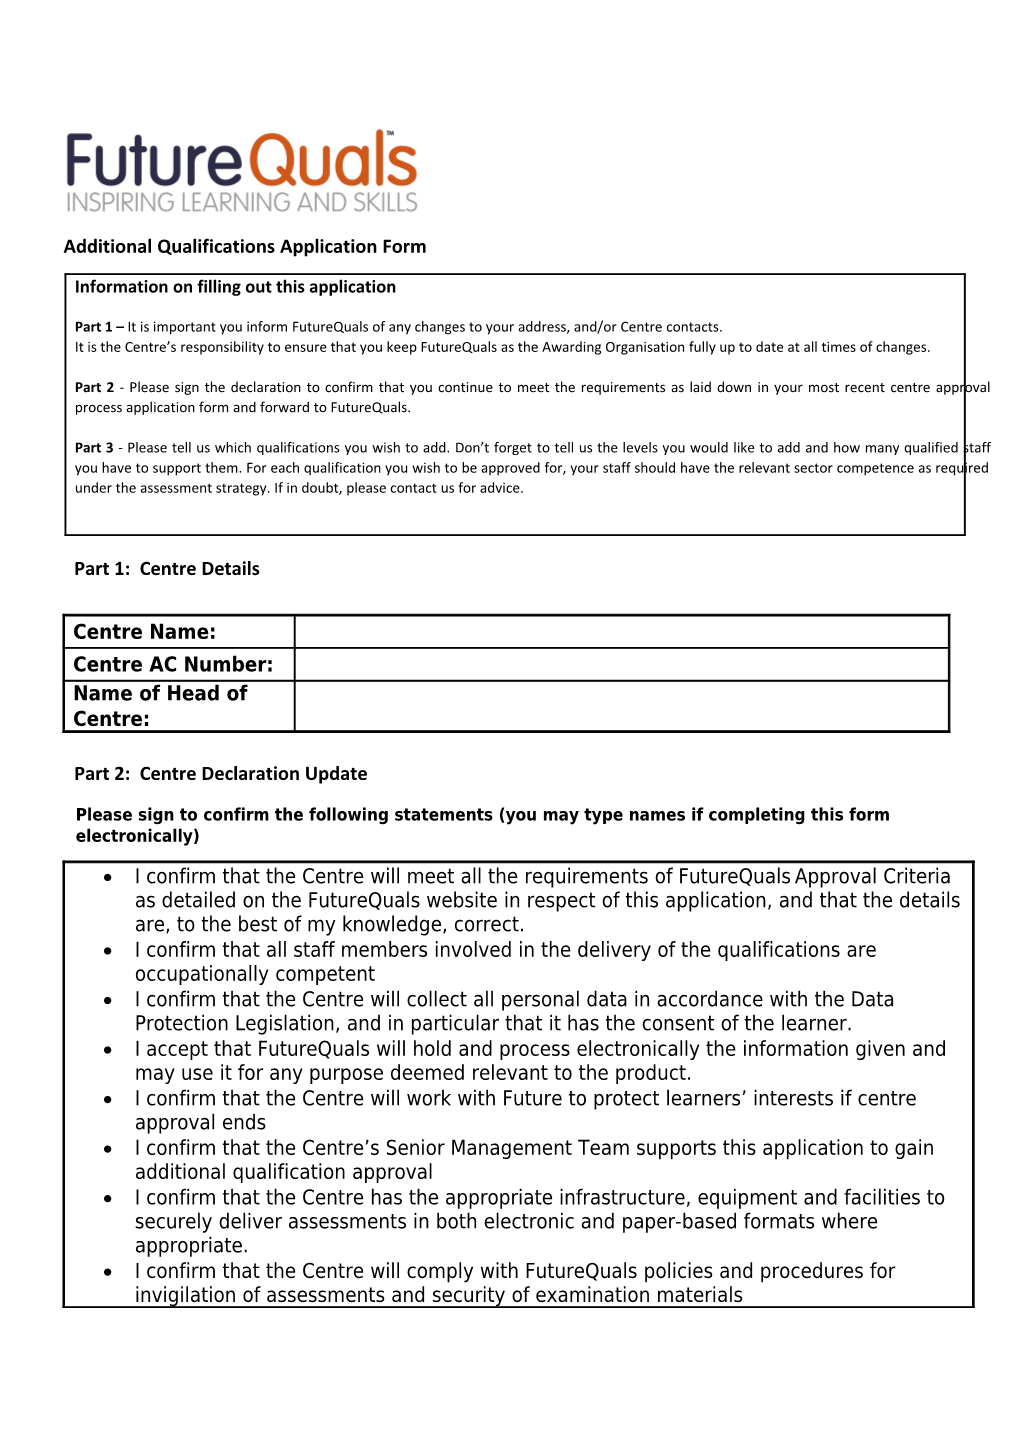 Additional Qualifications Application Form